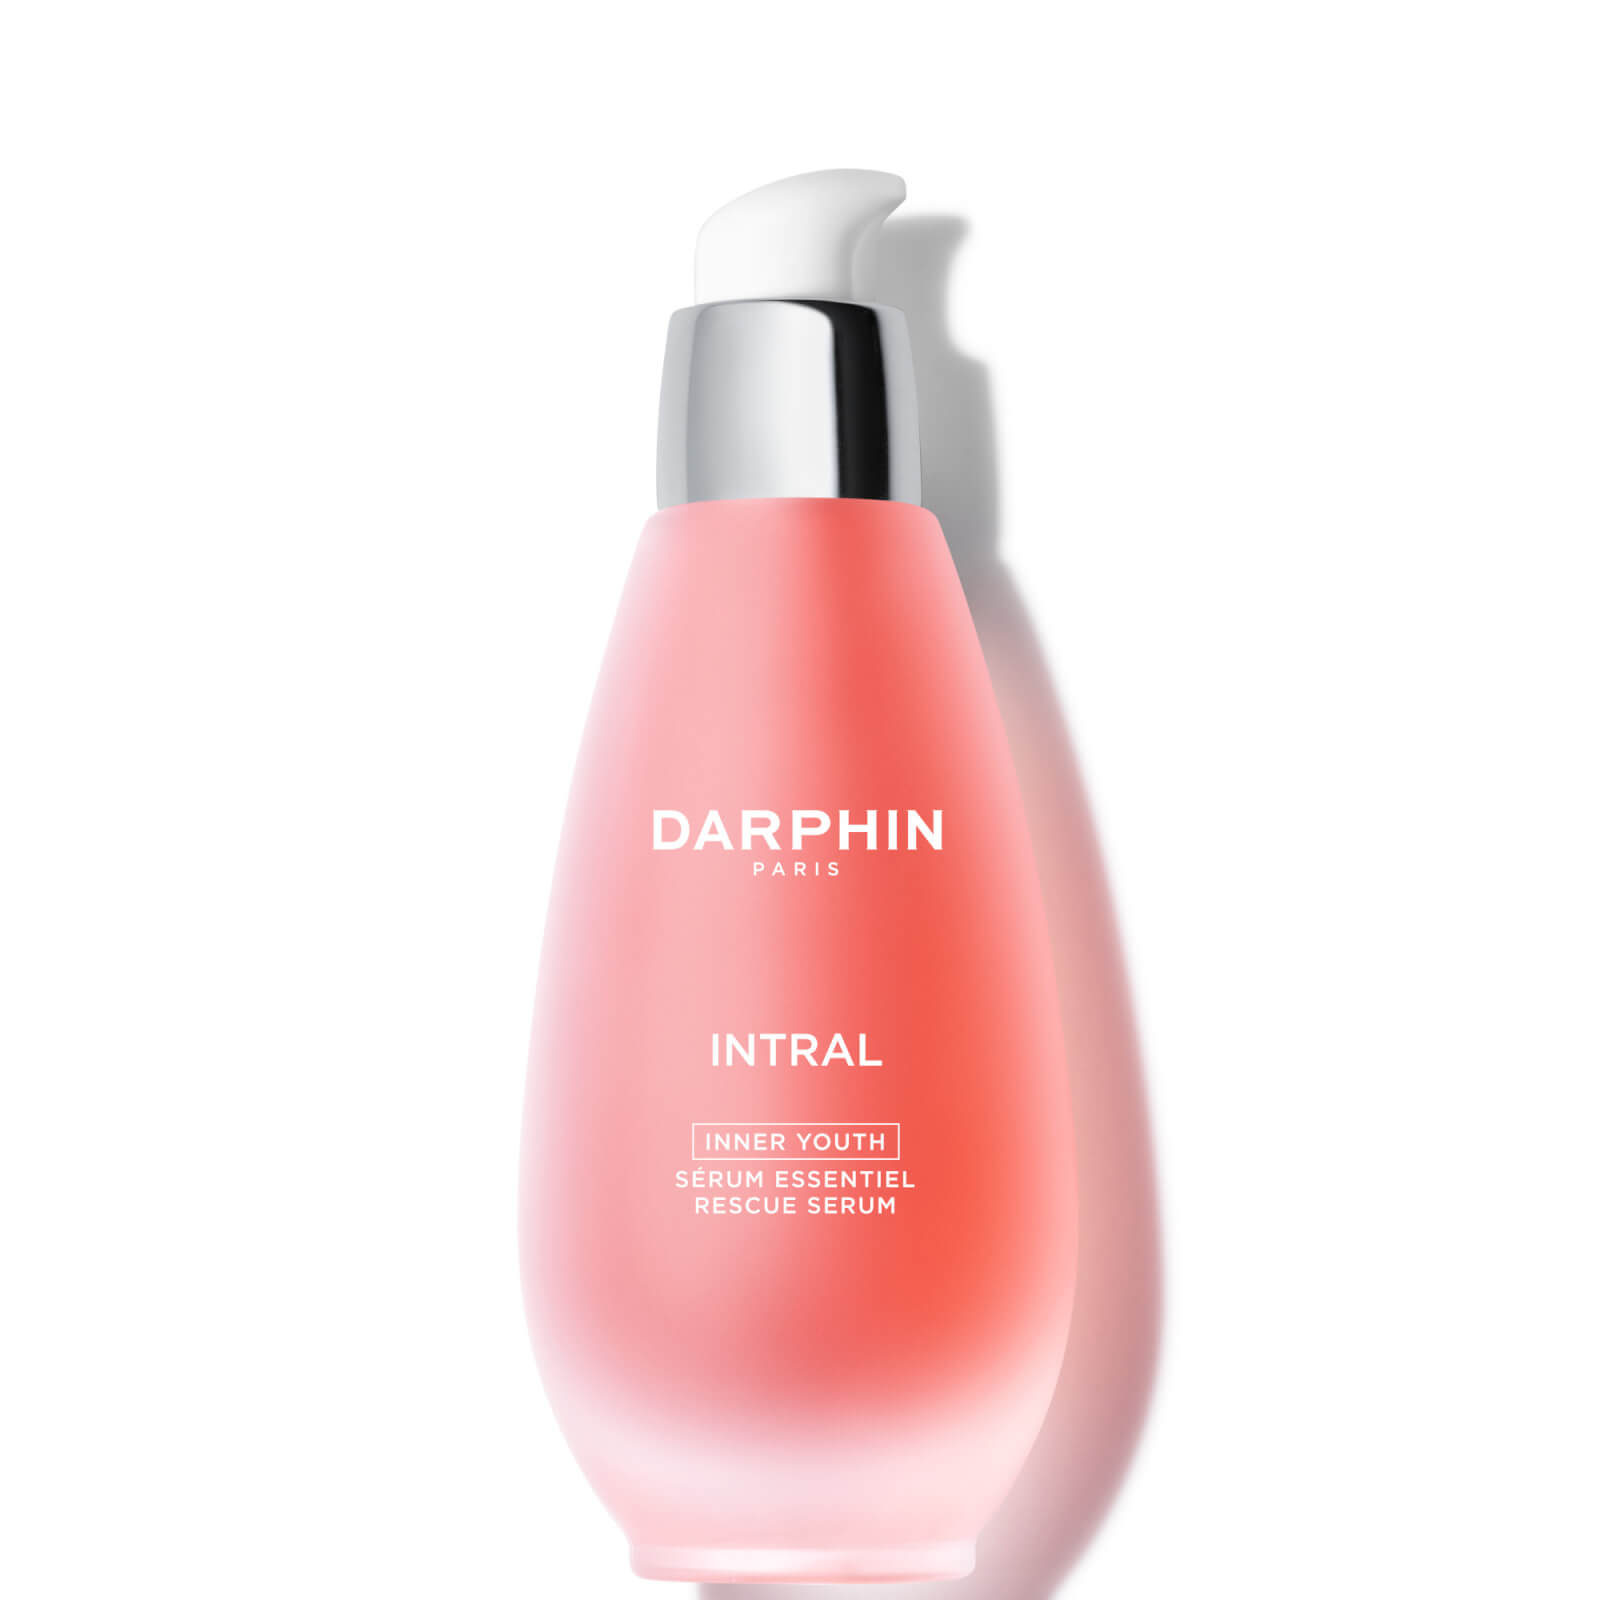 Photos - Cream / Lotion Darphin Intral Inner Youth Rescue Serum  - 30ml DCFE010000 (Various Sizes)